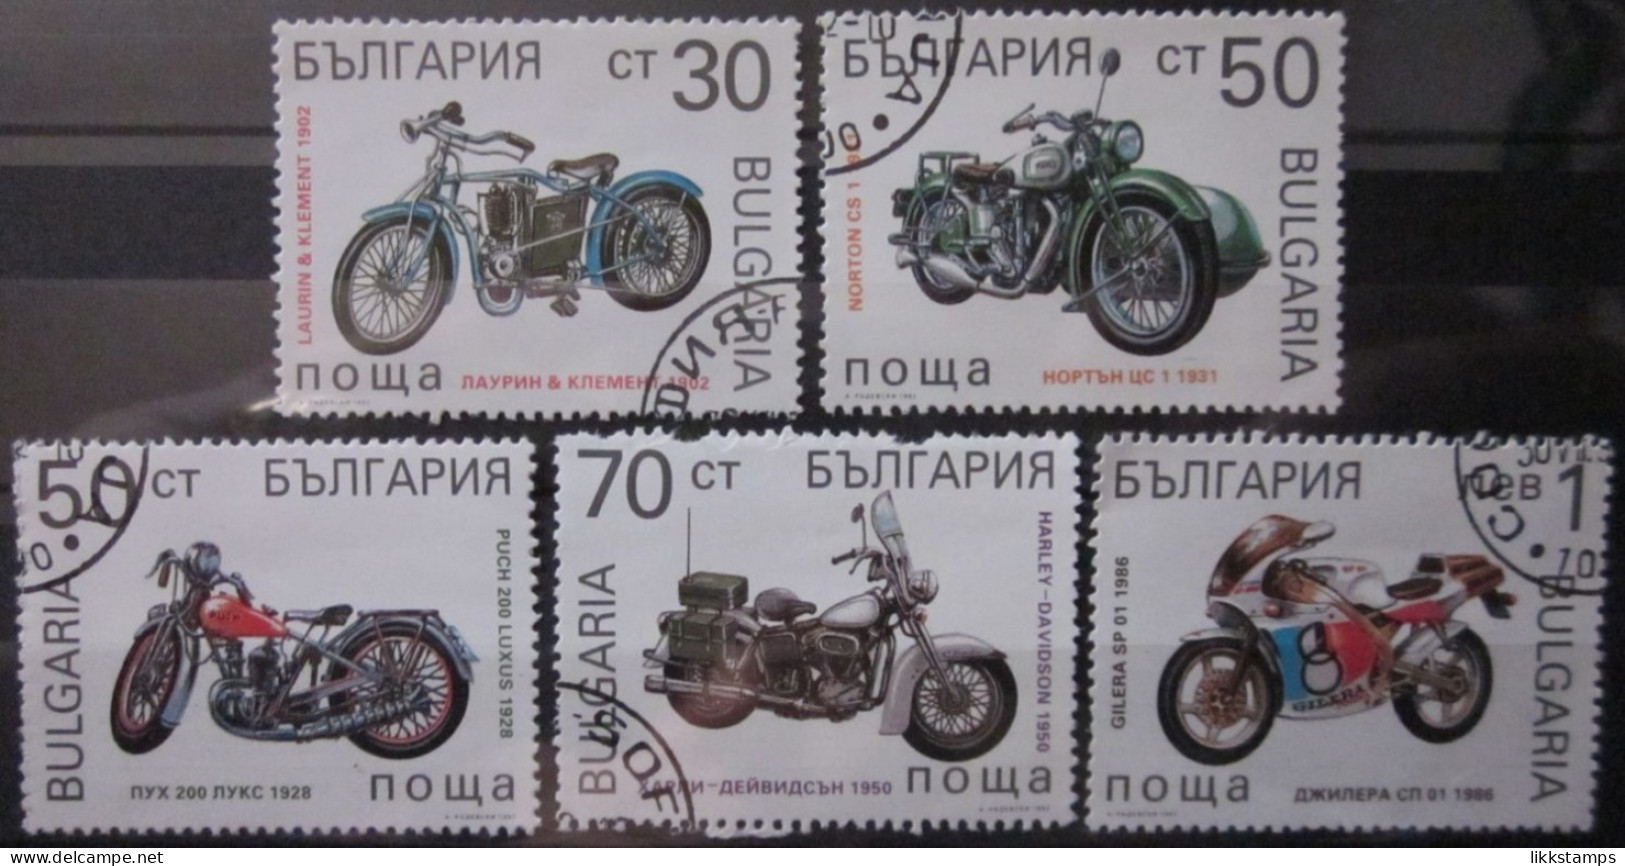 BULGARIA 1992 ~ S.G. 3845 - 3849, ~ MOTORCYCLES. ~  VFU #02967 - Used Stamps